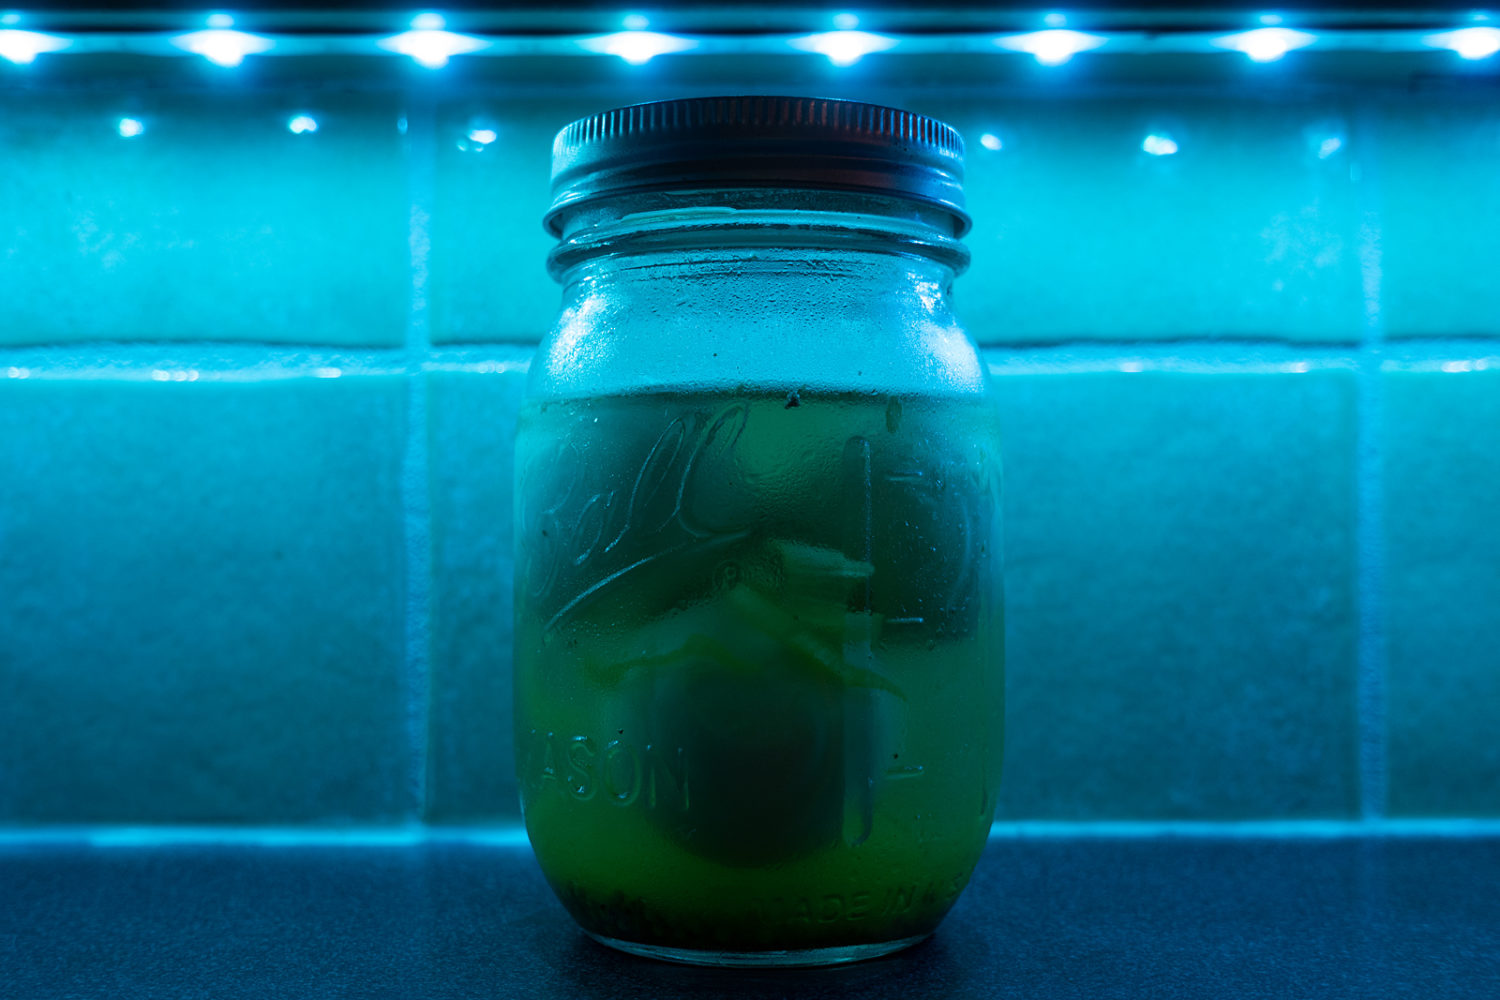 Pickled eggs under blue light in the kitchen